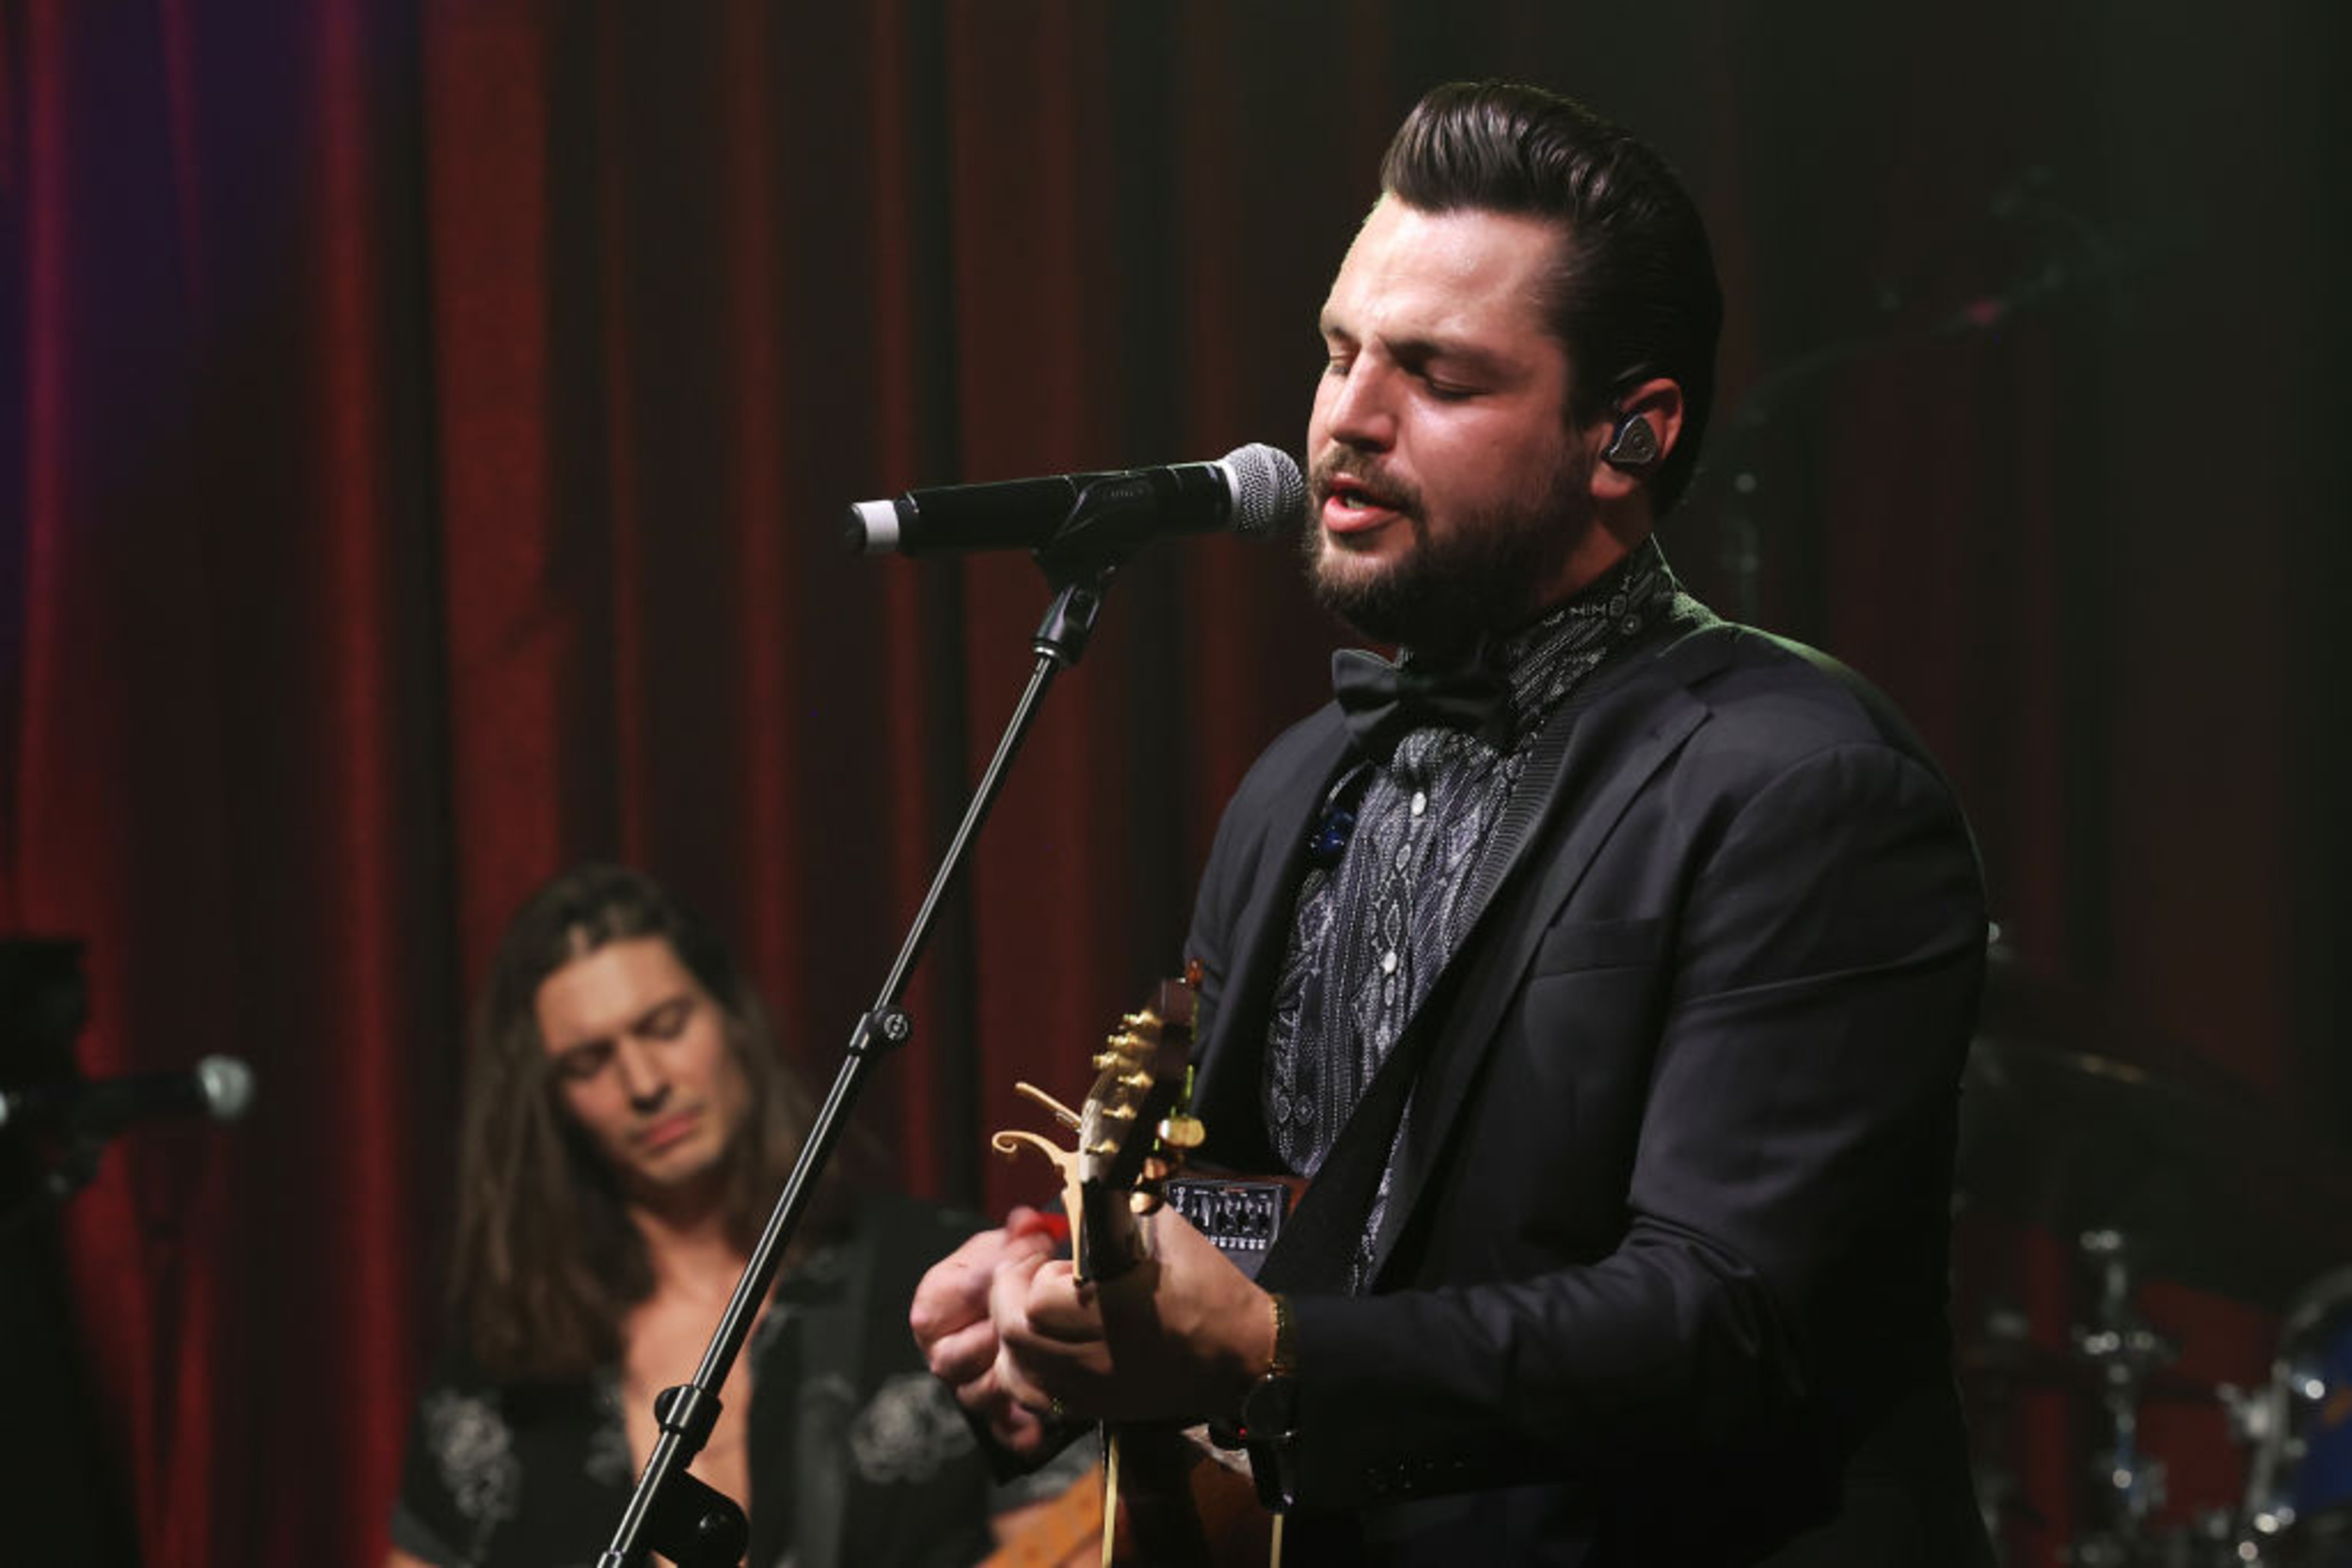 <p>The winner of the nineteenth season of "American Idol," Chayce Beckham has already scored a Platinum hit with 2021's "23," but he's not stopping there. In 2023, Beckham returned with a great new single, "Til The Day I Die," and he's headed out on tour with Luke Bryan in 2024. </p><p>You may also like: <a href='https://www.yardbarker.com/entertainment/articles/shot_by_shot_hollywoods_wildest_and_weirdest_remakes_032524/s1__28312799'>Shot by shot: Hollywood’s wildest and weirdest remakes</a></p>